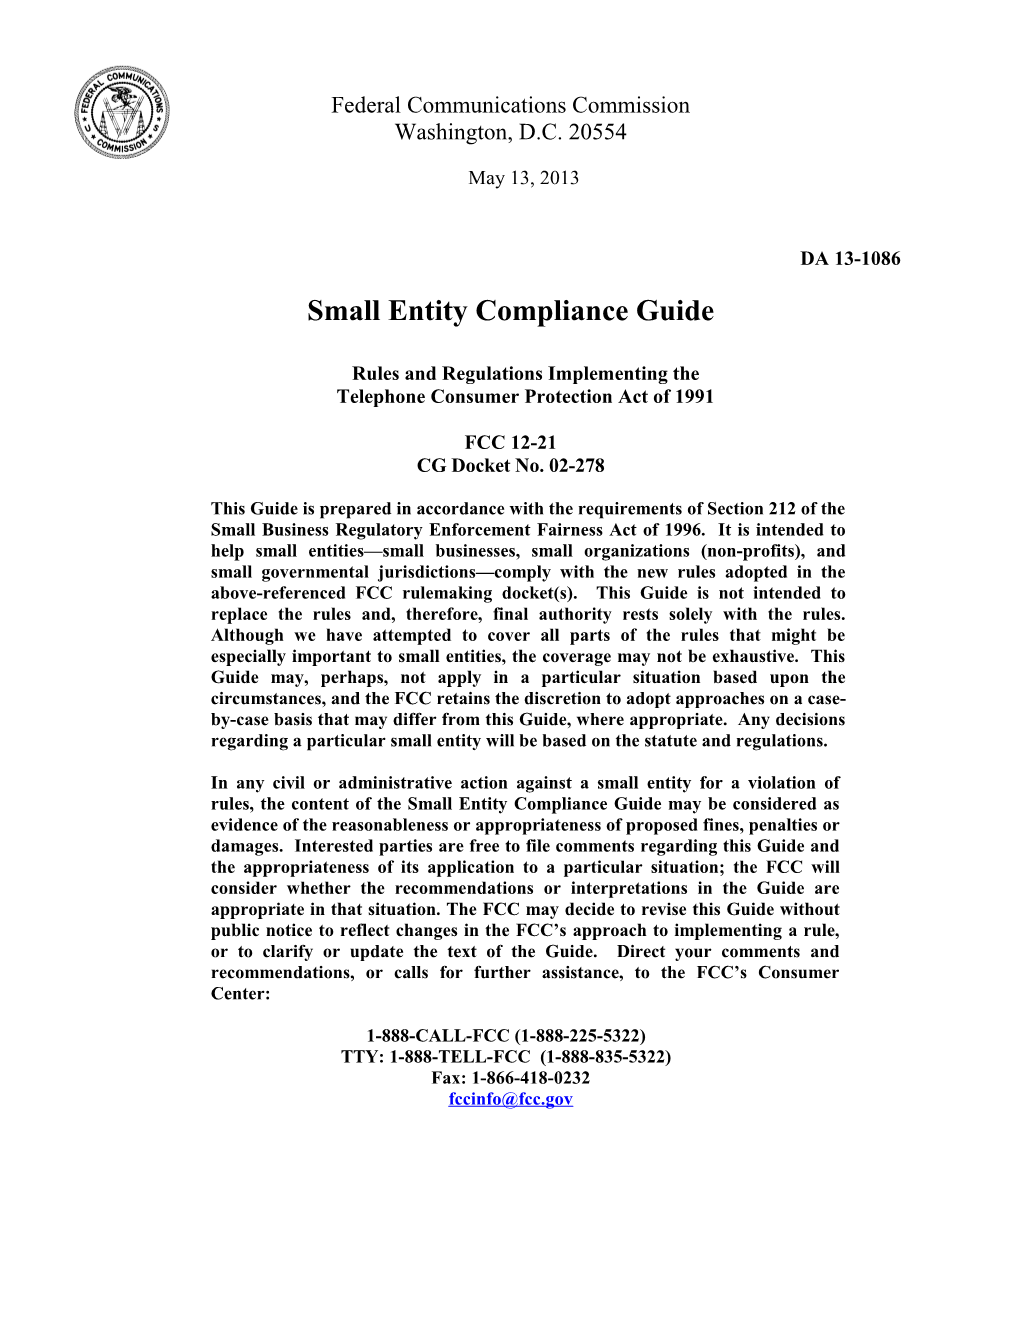 Small Entity Compliance Guide s5